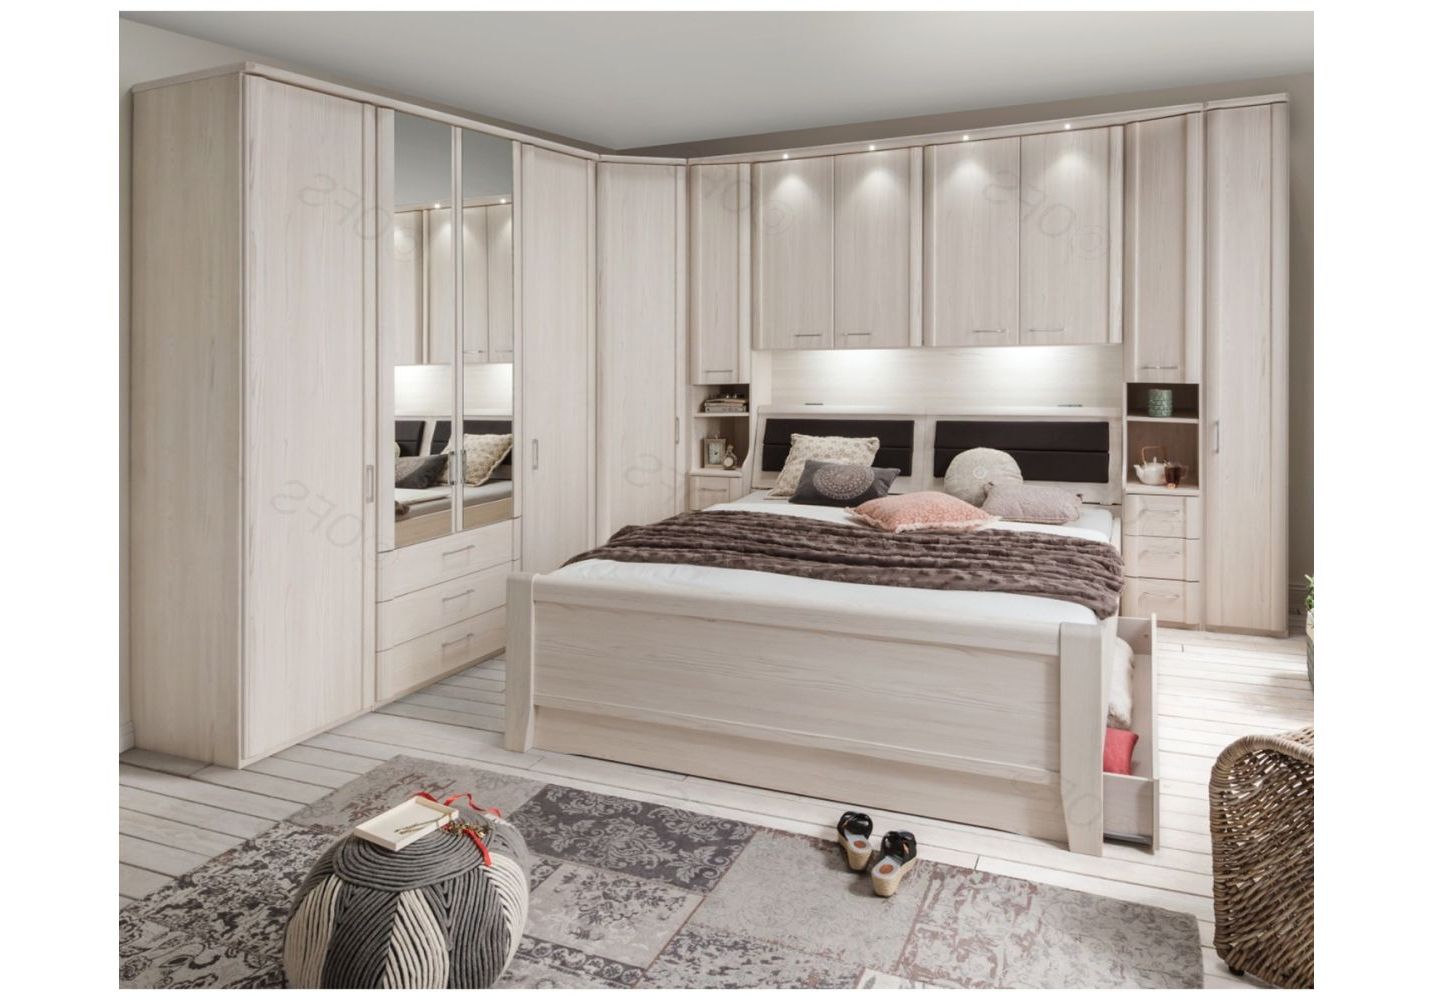 Wiemann Luxor4 | Luxor4 Wooden Overbed Unit Suggestion 1&2|  Onlinefurniturestore.co.uk Intended For Over Bed Wardrobes Units (Gallery 2 of 20)